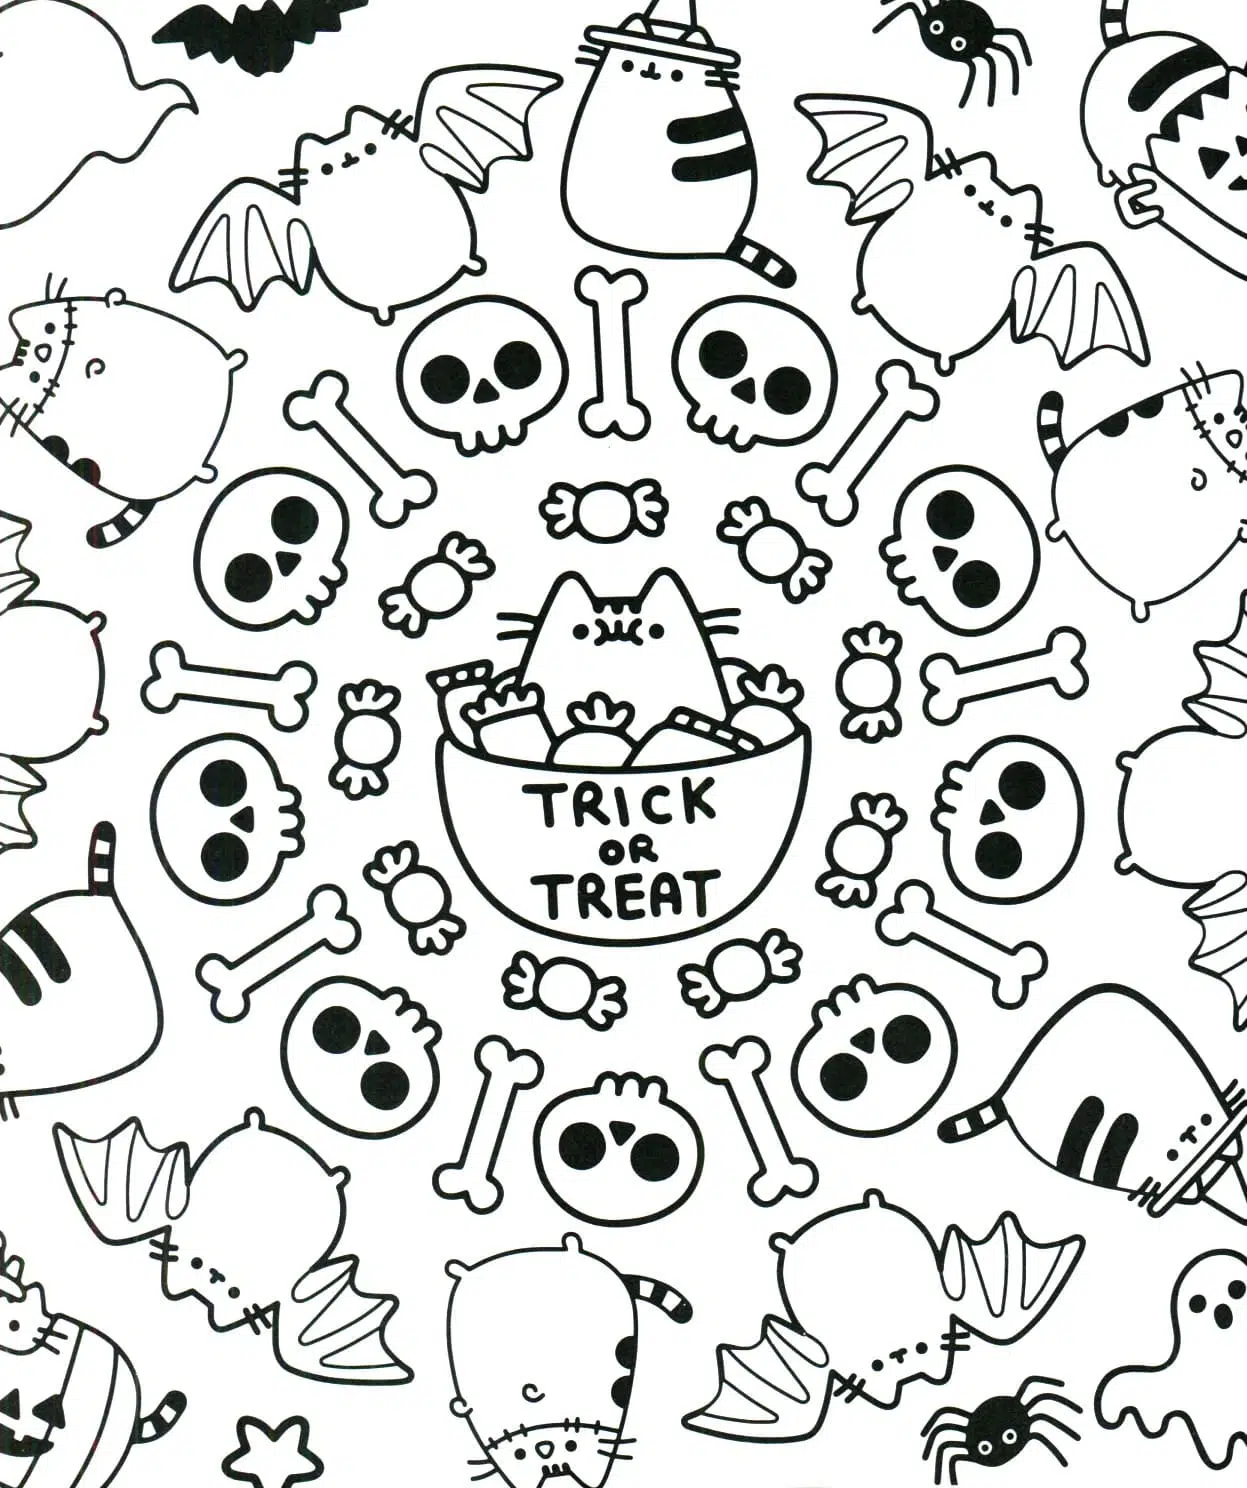 Trick or Treat 19